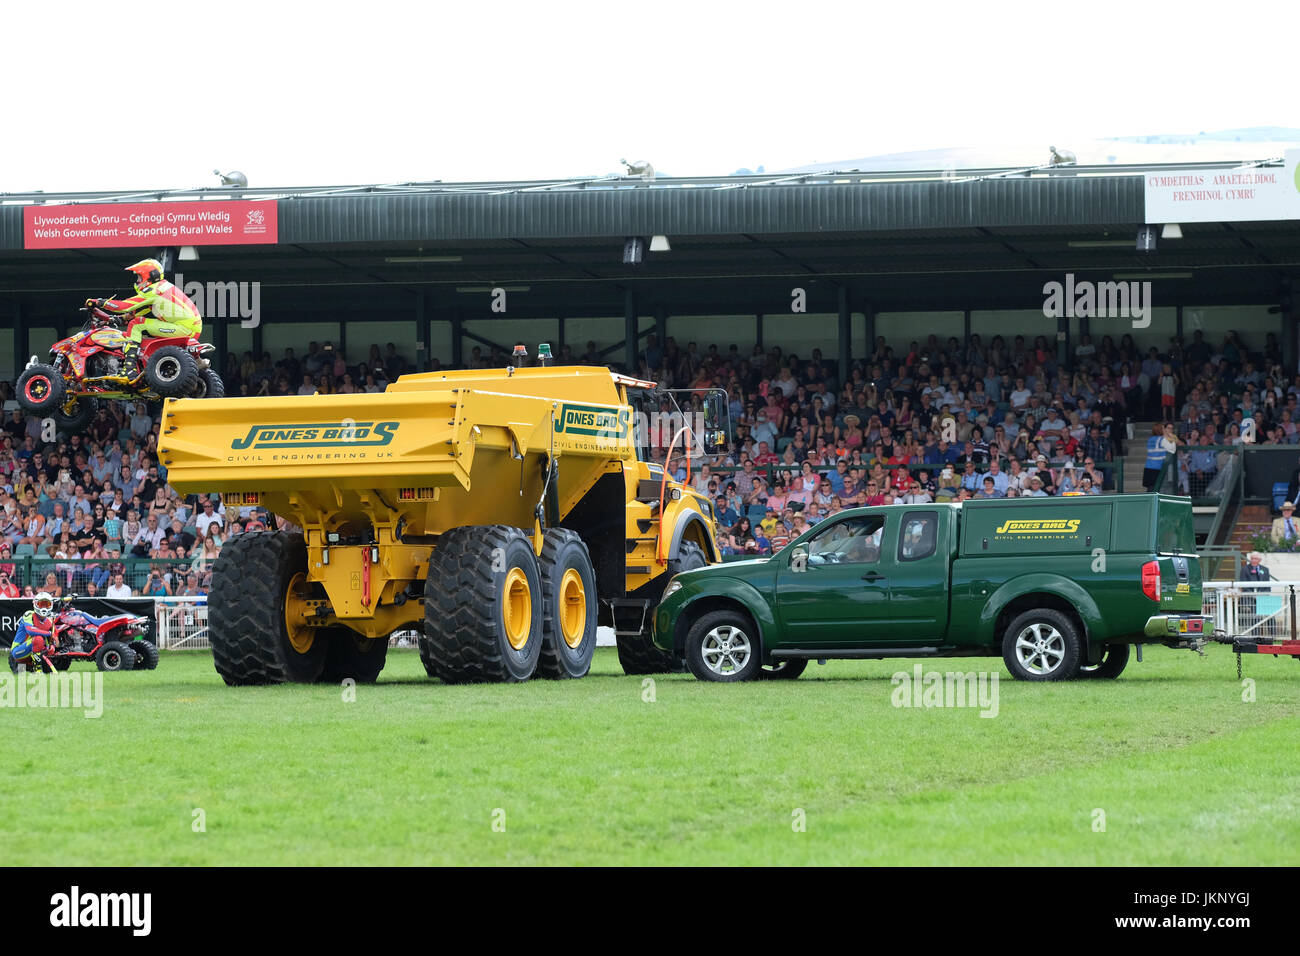 Royal Welsh Show - Monday 24th July 2017 - The Kangaroo Kid motorcycle stuntman is too low as he tries to jump a green pickup truck and a large yellow dumper truck in front of the spectators at the Royal Welsh Show. His quad bike hits the far side of the yellow dumper truck throwing him to the ground. The stuntman was taken away by ambulance condition unknown. Today is the Opening Day of the largest four day agricultural show in the UK. Photo Steven May / Alamy Live News Stock Photo